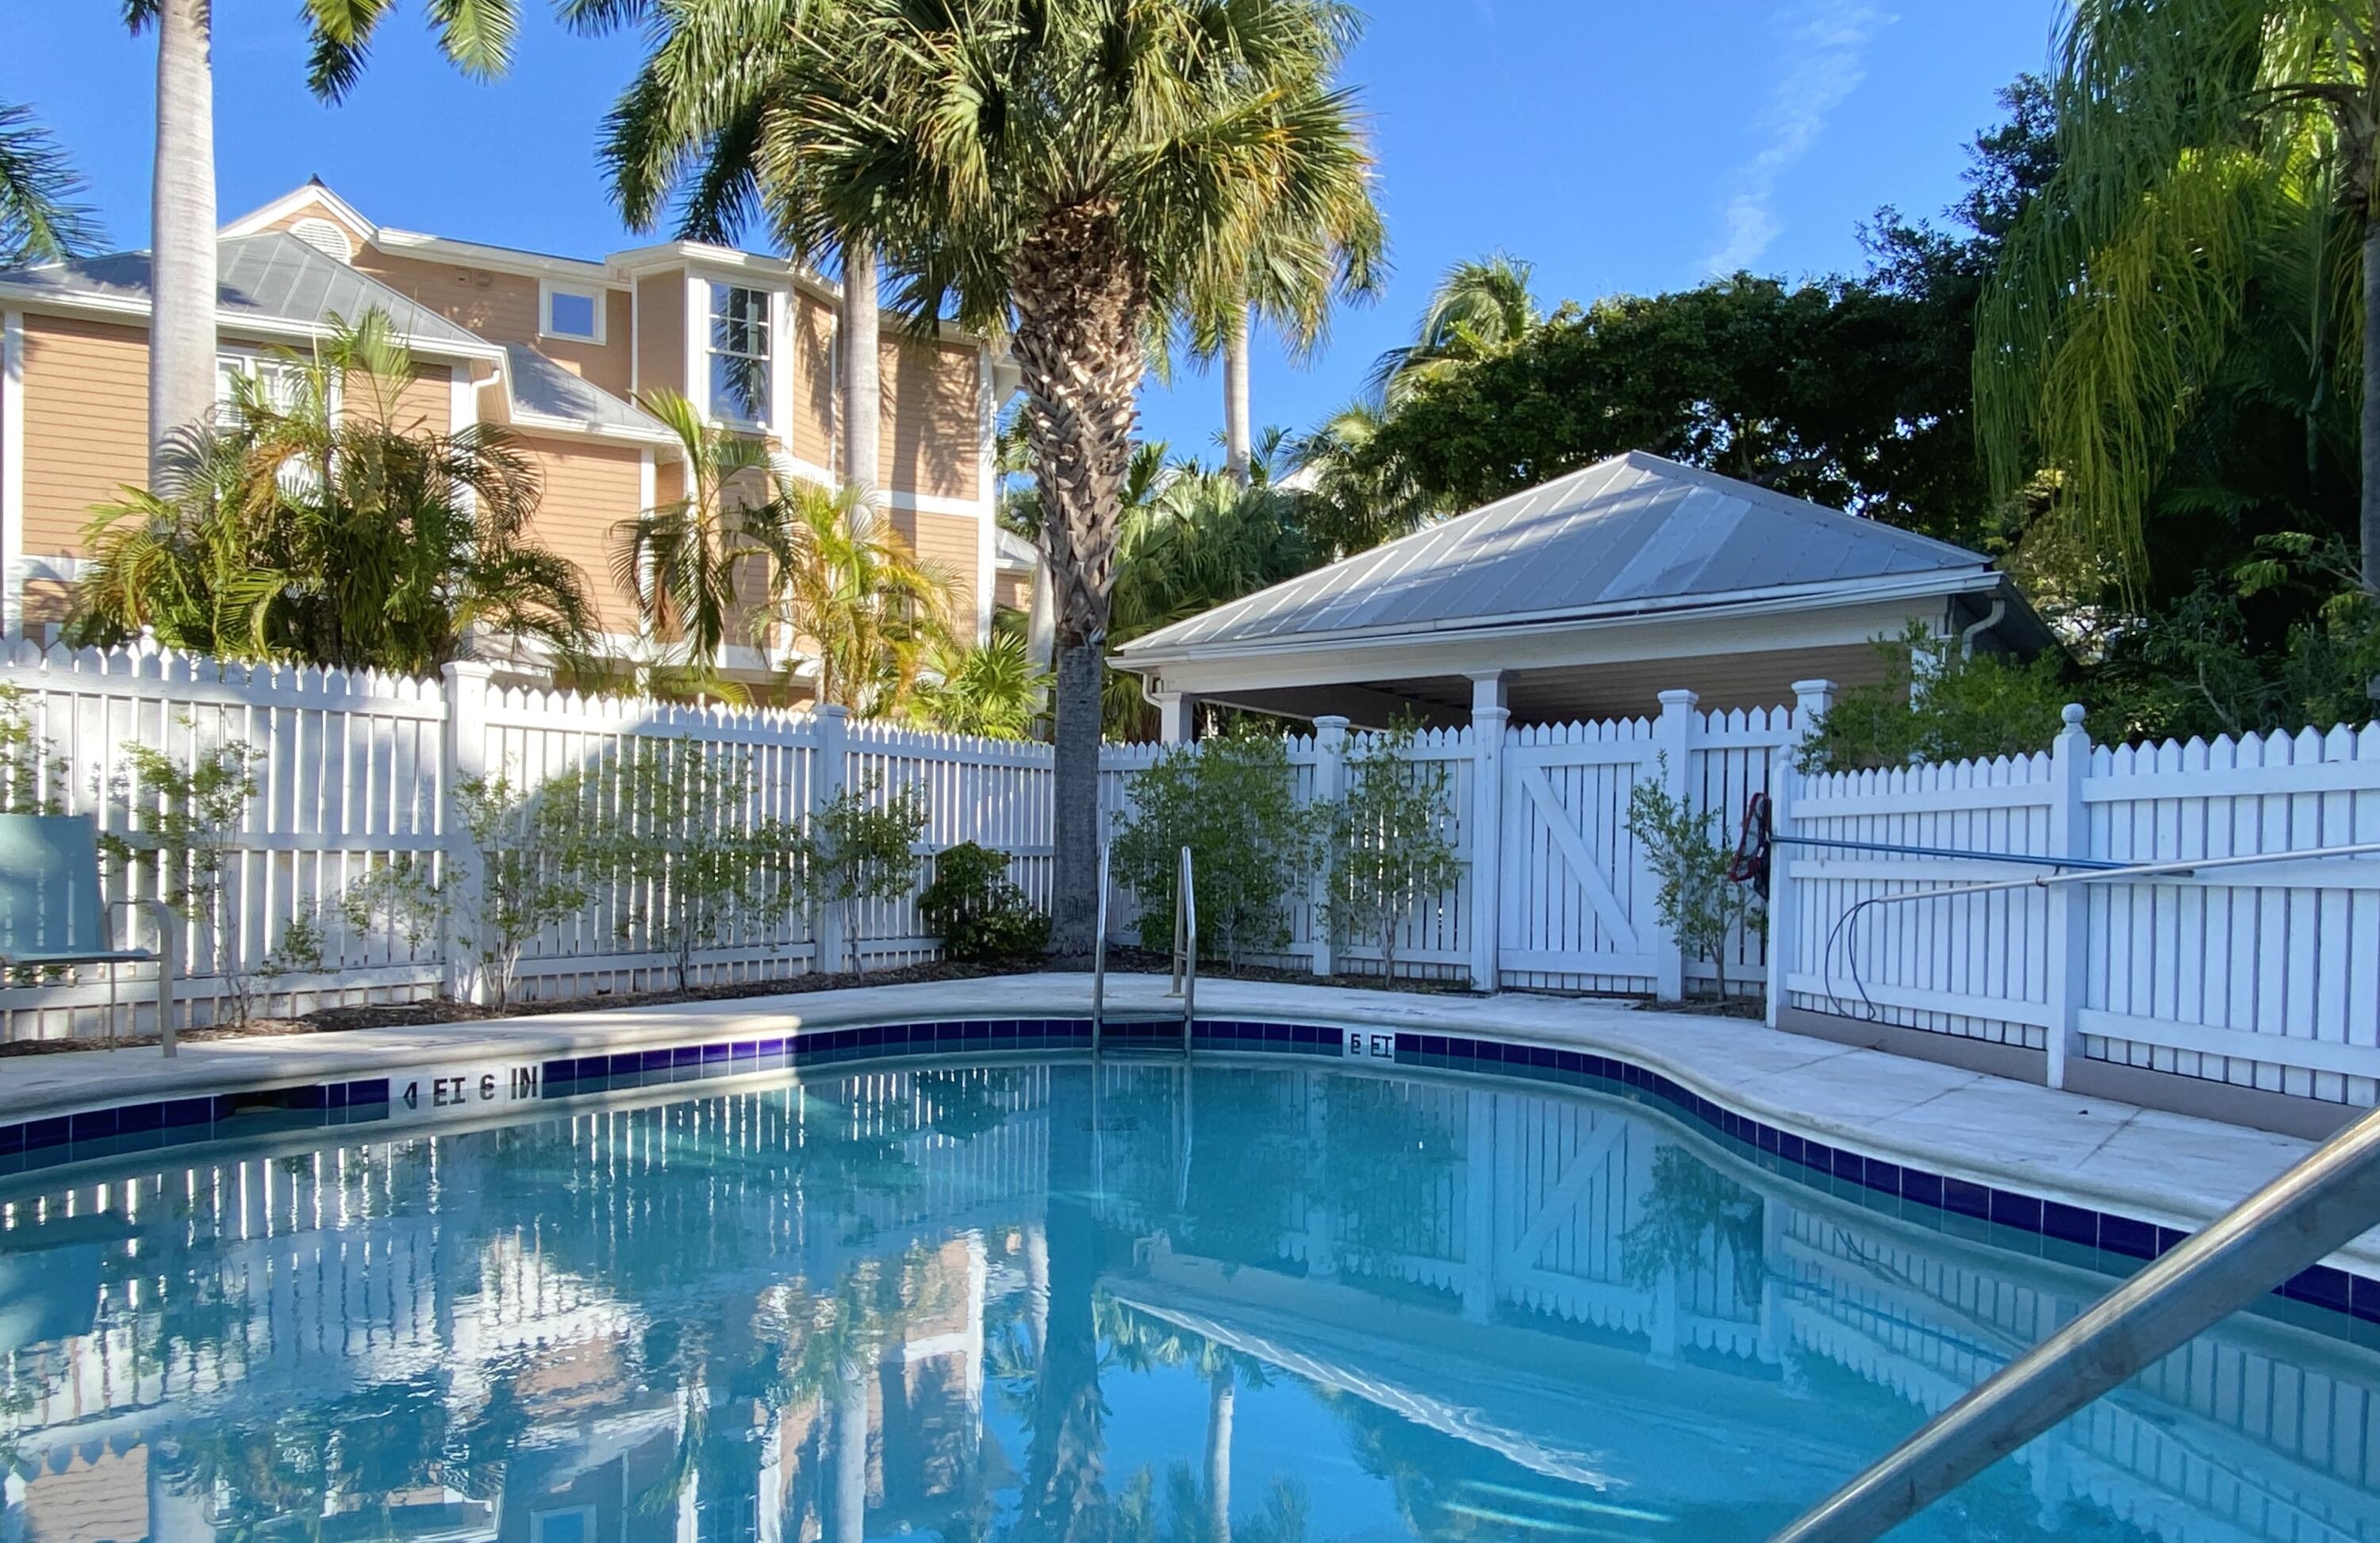 101 Front Street, 23, Key West, Florida, 33040, United States, 2 Bedrooms Bedrooms, ,3 BathroomsBathrooms,Residential,For Sale,101 Front Street, 23,1389494